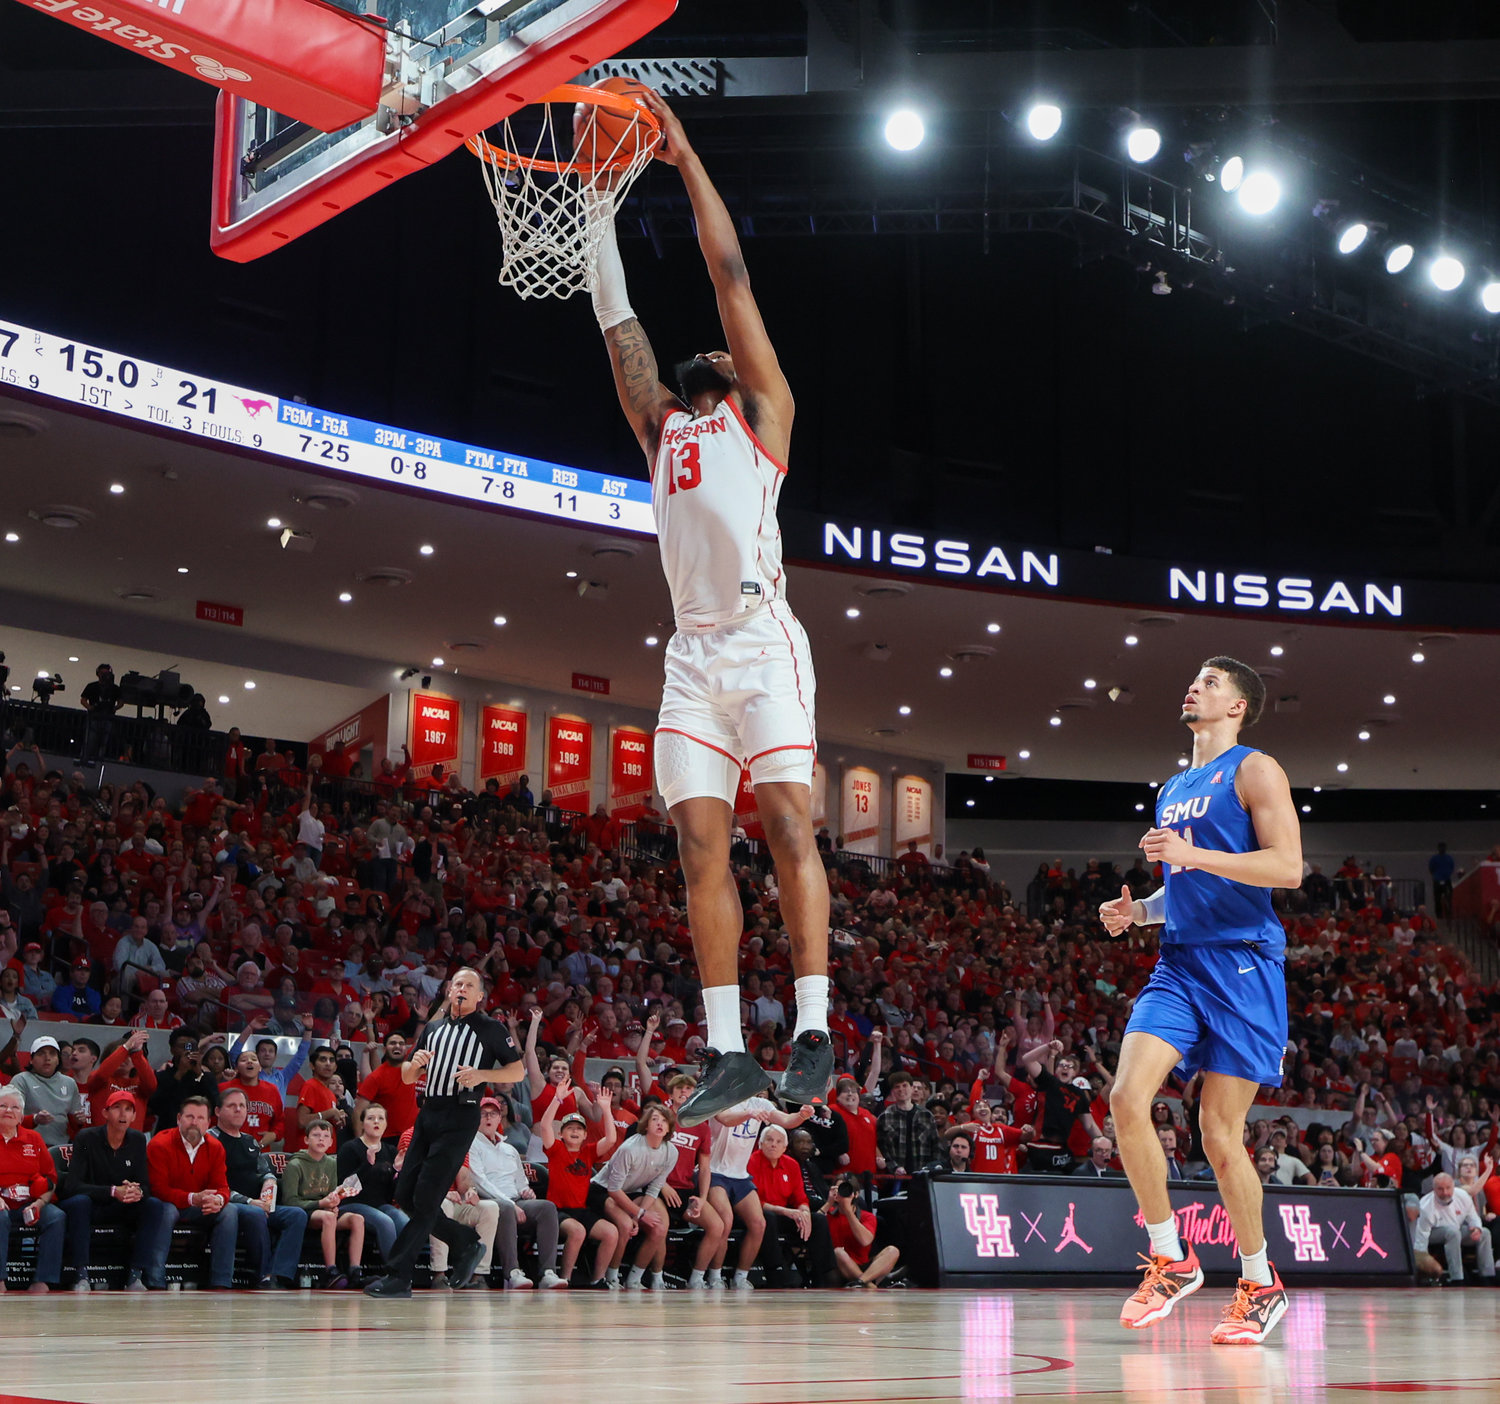 Houston forward J'Wan Roberts (13) dunks the ball during an NCAA men’s basketball game between the Houston Cougars and the Southern Methodist Mustangs on Jan. 5, 2023 in Houston. Houston won, 87-53,